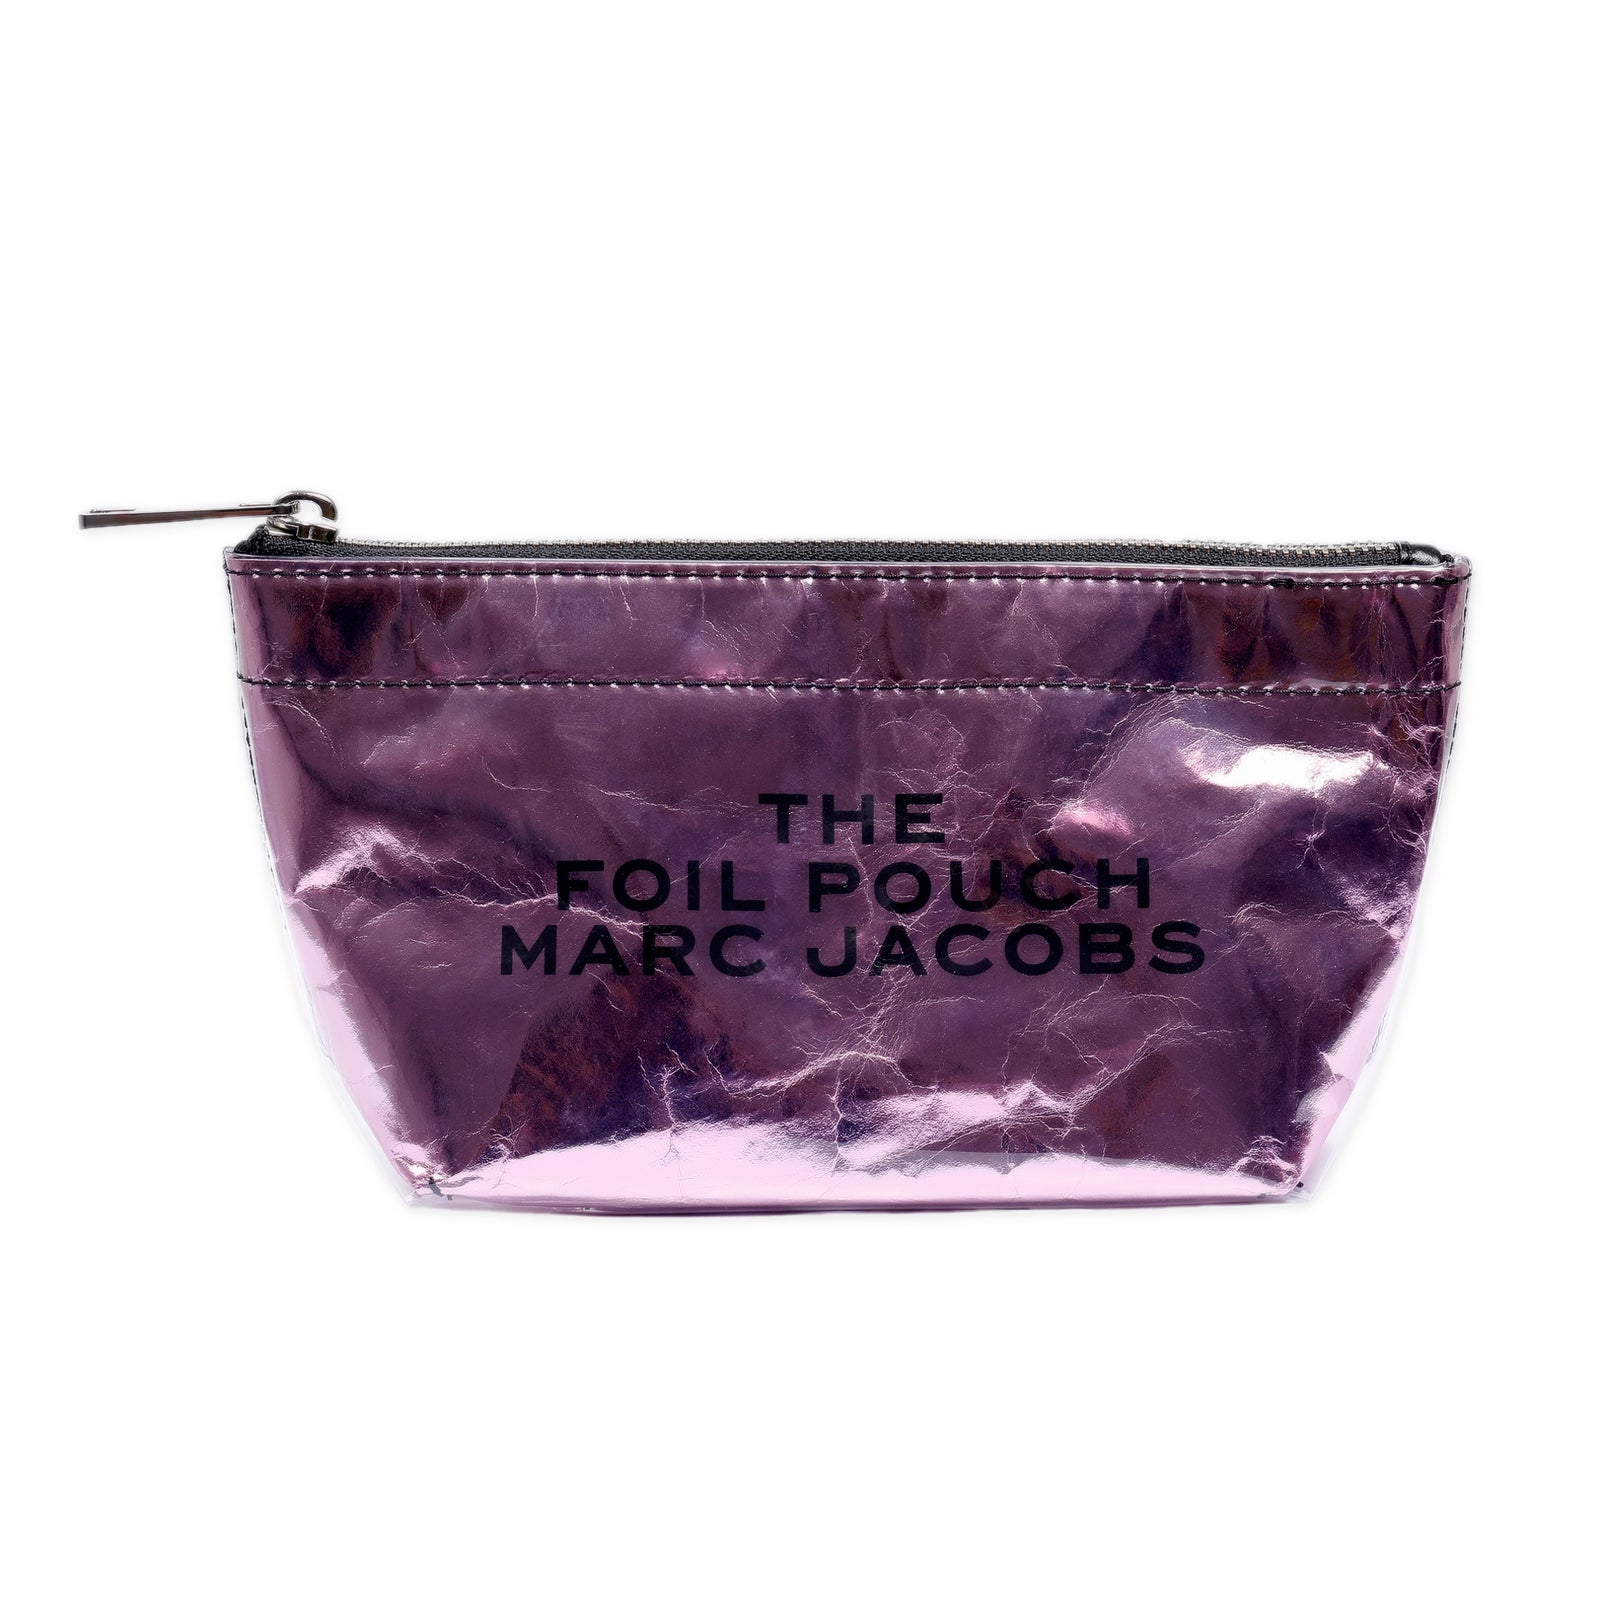 MARC JACOBS COSMETIC CASE - Yooto